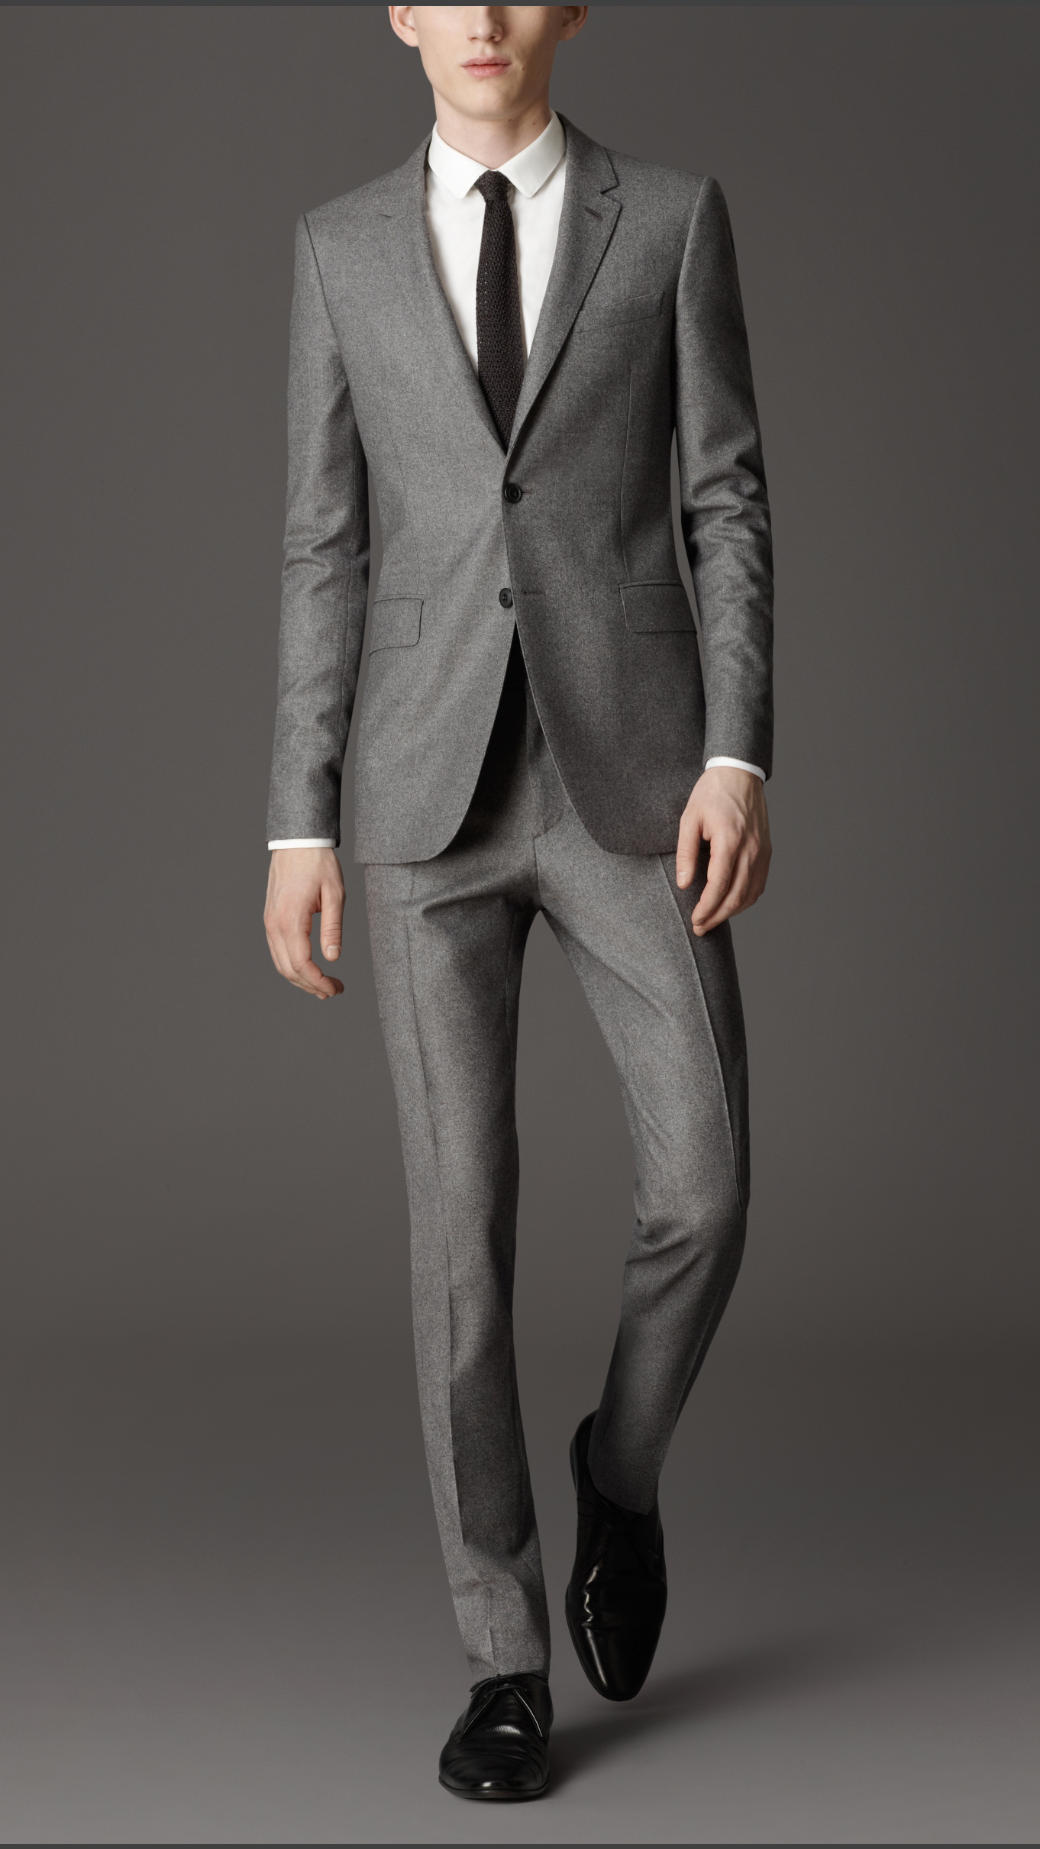 Lyst - Burberry Travel Tailoring Wool Flannel Suit in Gray for Men